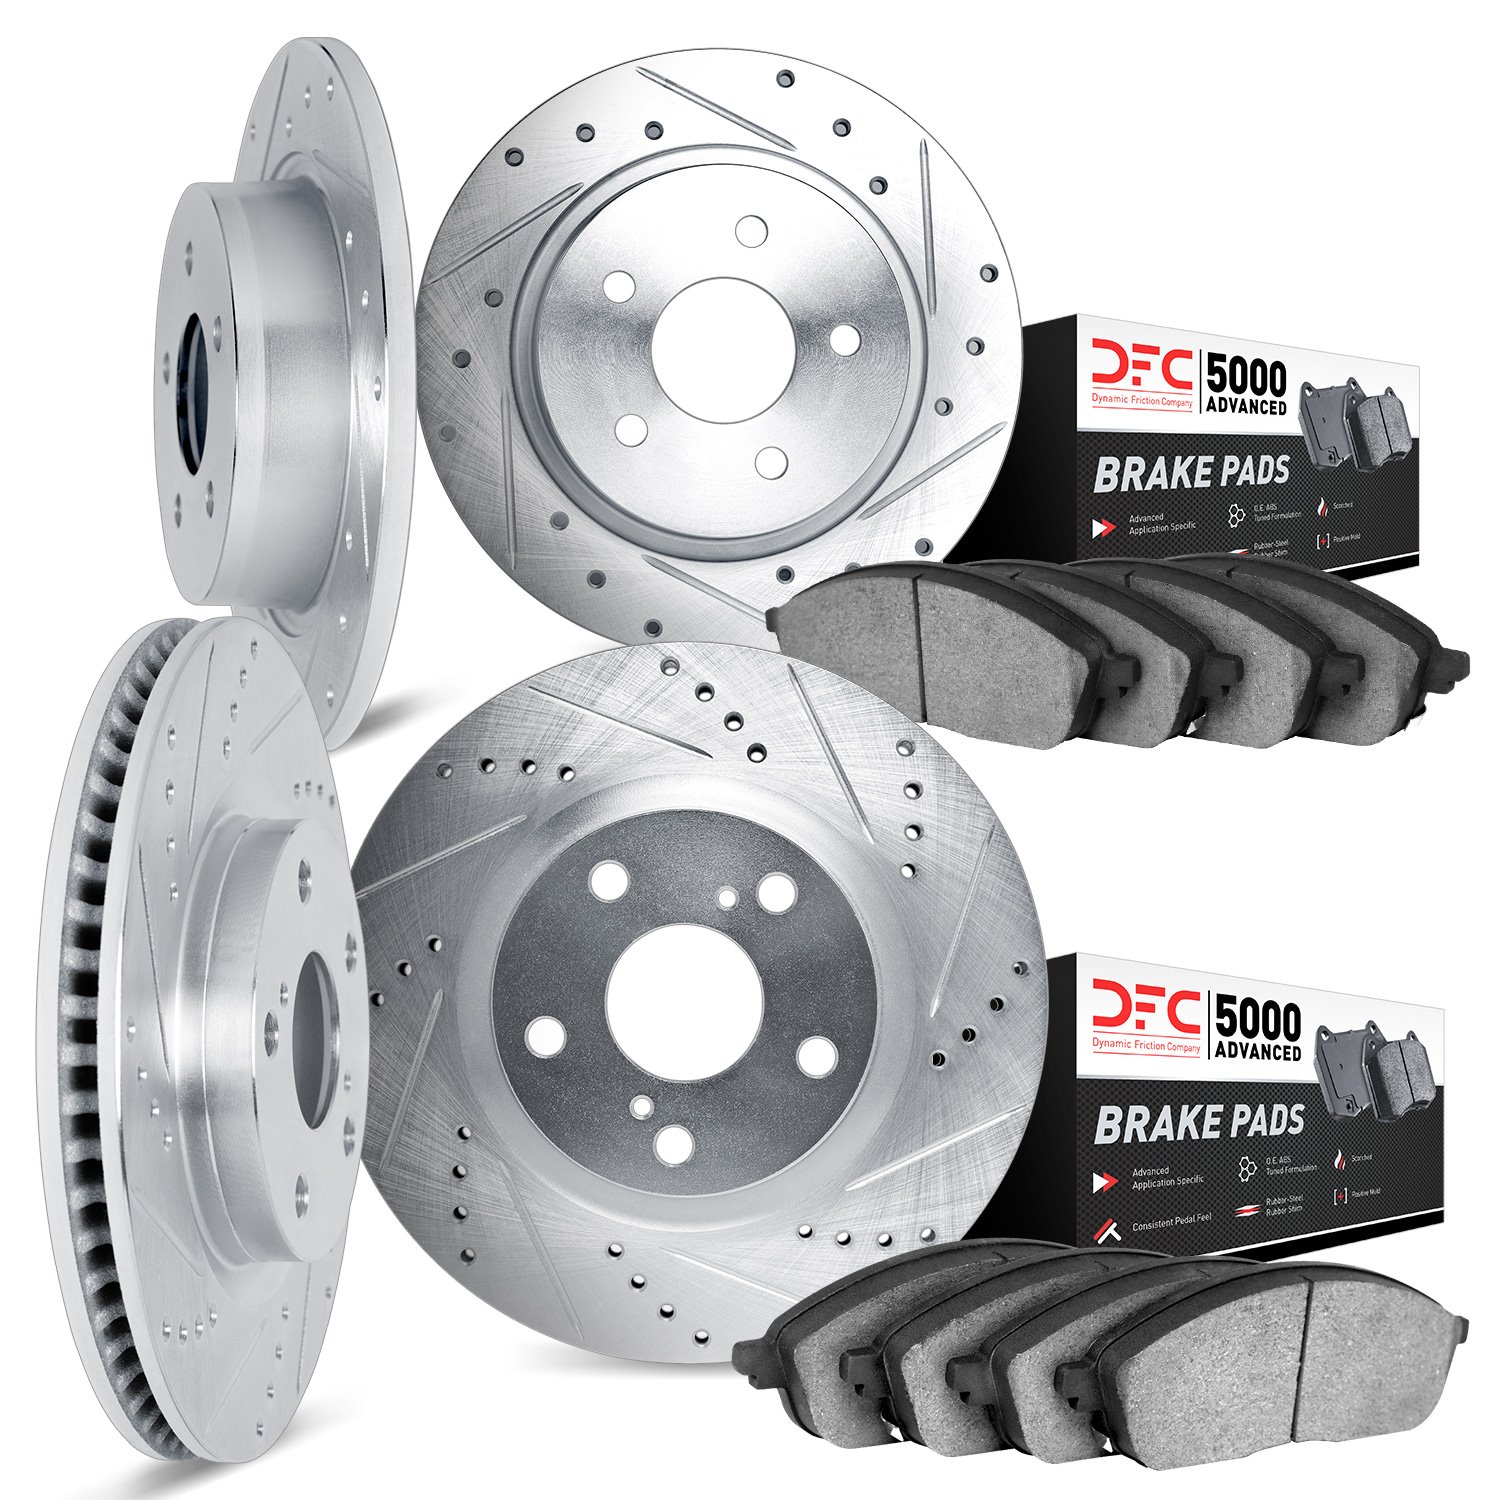 7504-40219 Drilled/Slotted Brake Rotors w/5000 Advanced Brake Pads Kit [Silver], 1989-1991 Mopar, Position: Front and Rear